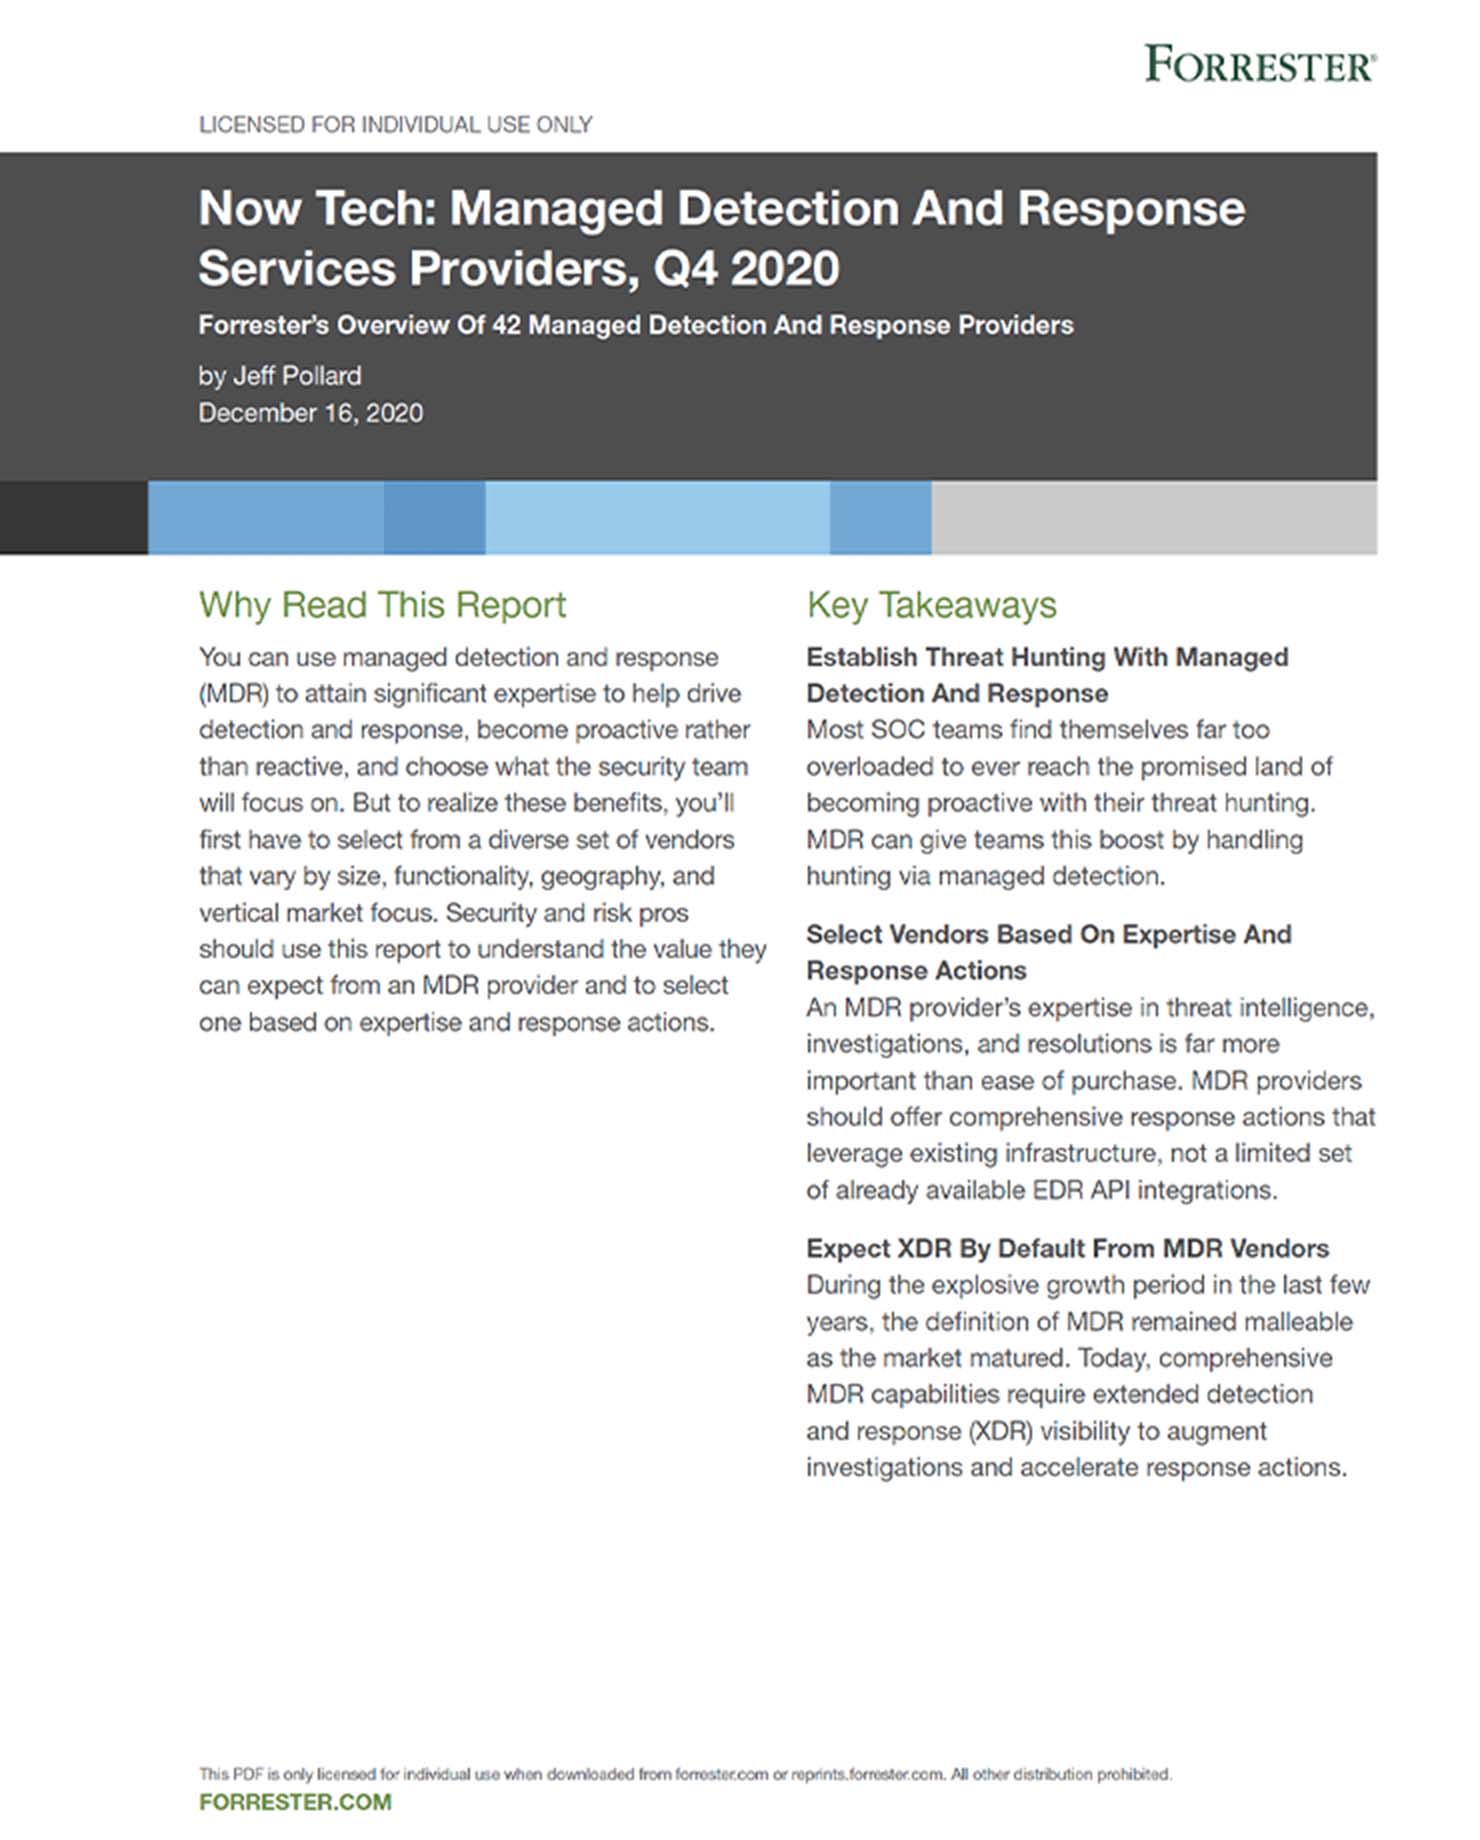 Forrester Report | Now Tech: Managed Detection and Response Services Providers Report